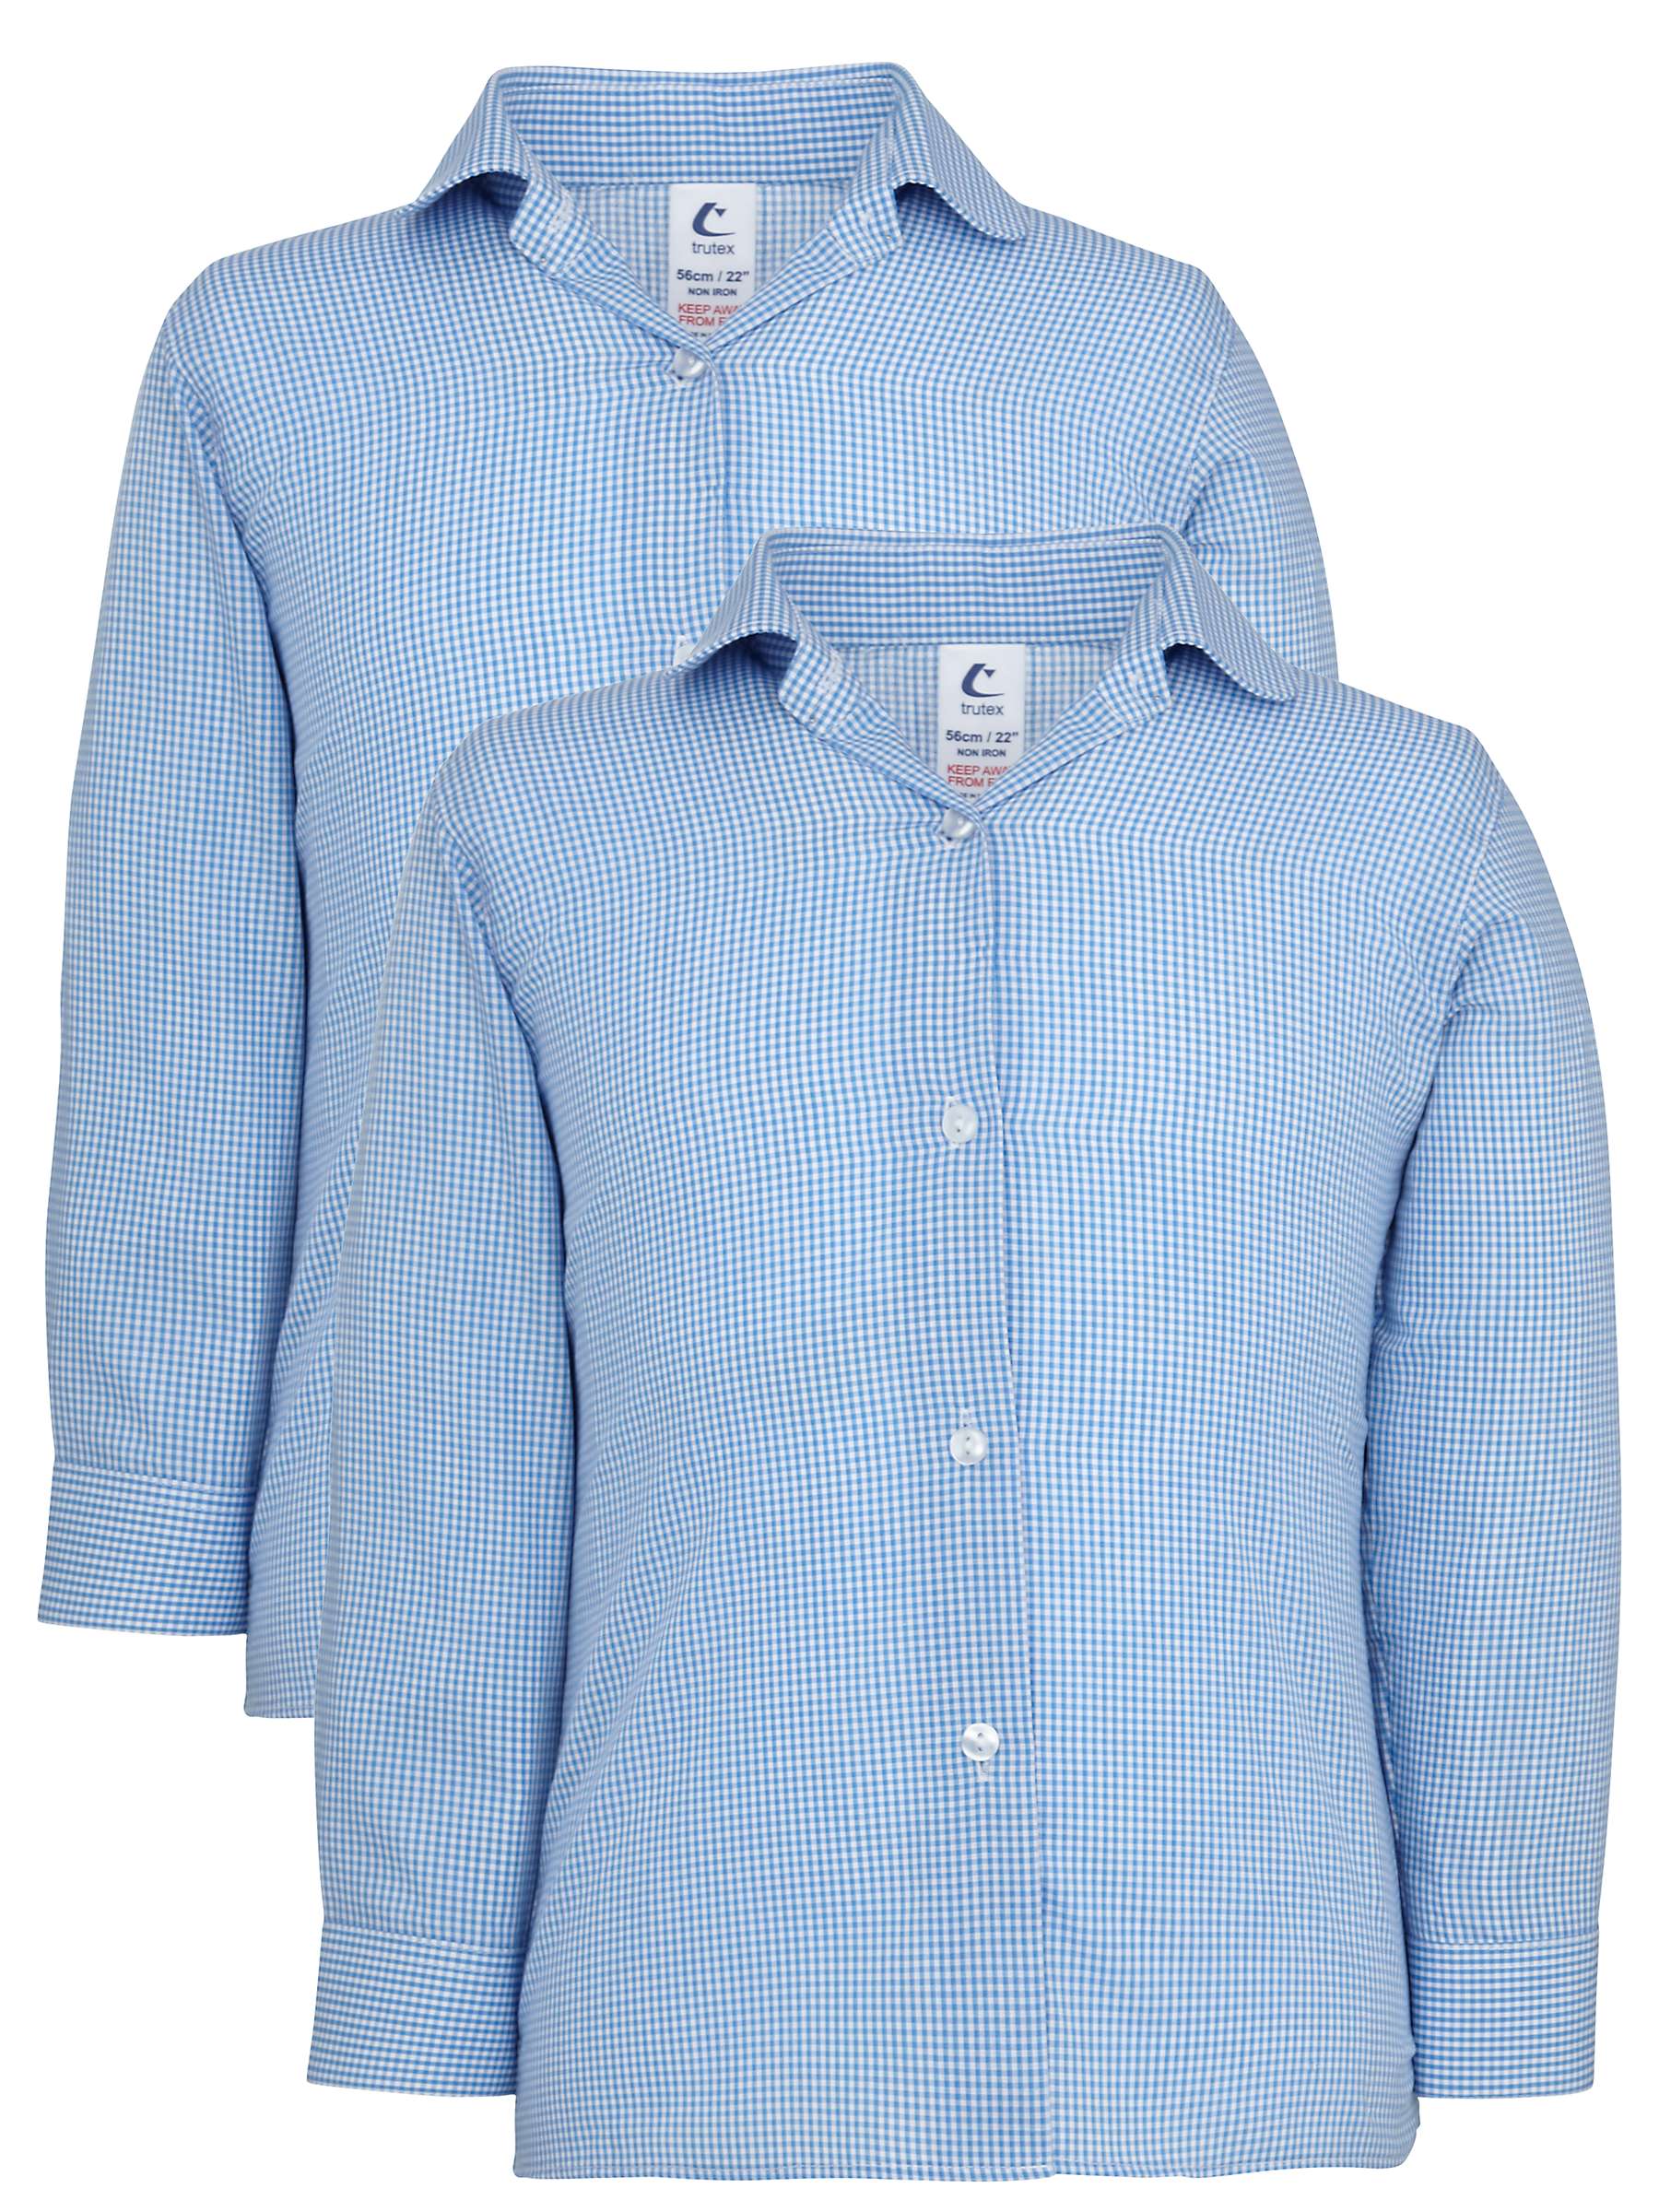 Buy Girls' School Long Sleeve Checked Blouse, Pack of 2, Blue/White Online at johnlewis.com